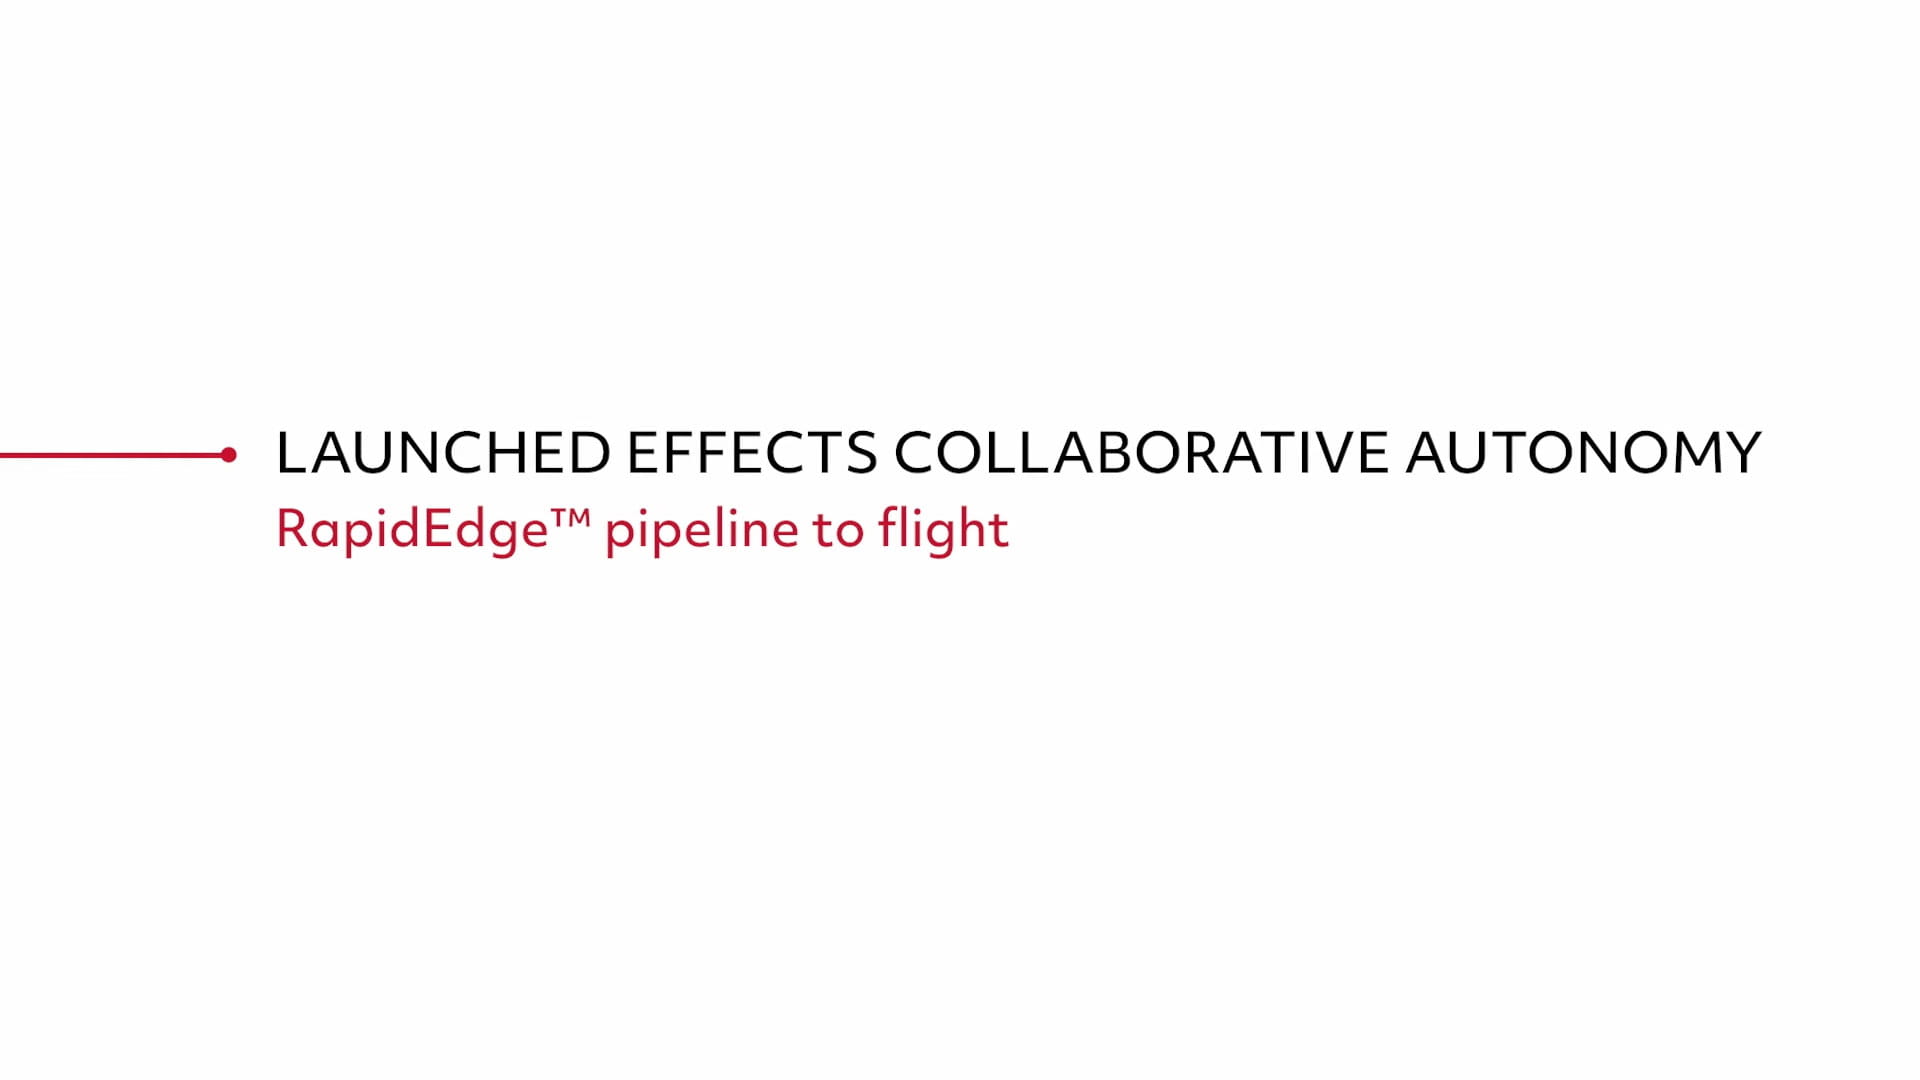 Launched Effects Collaborative Autonomy